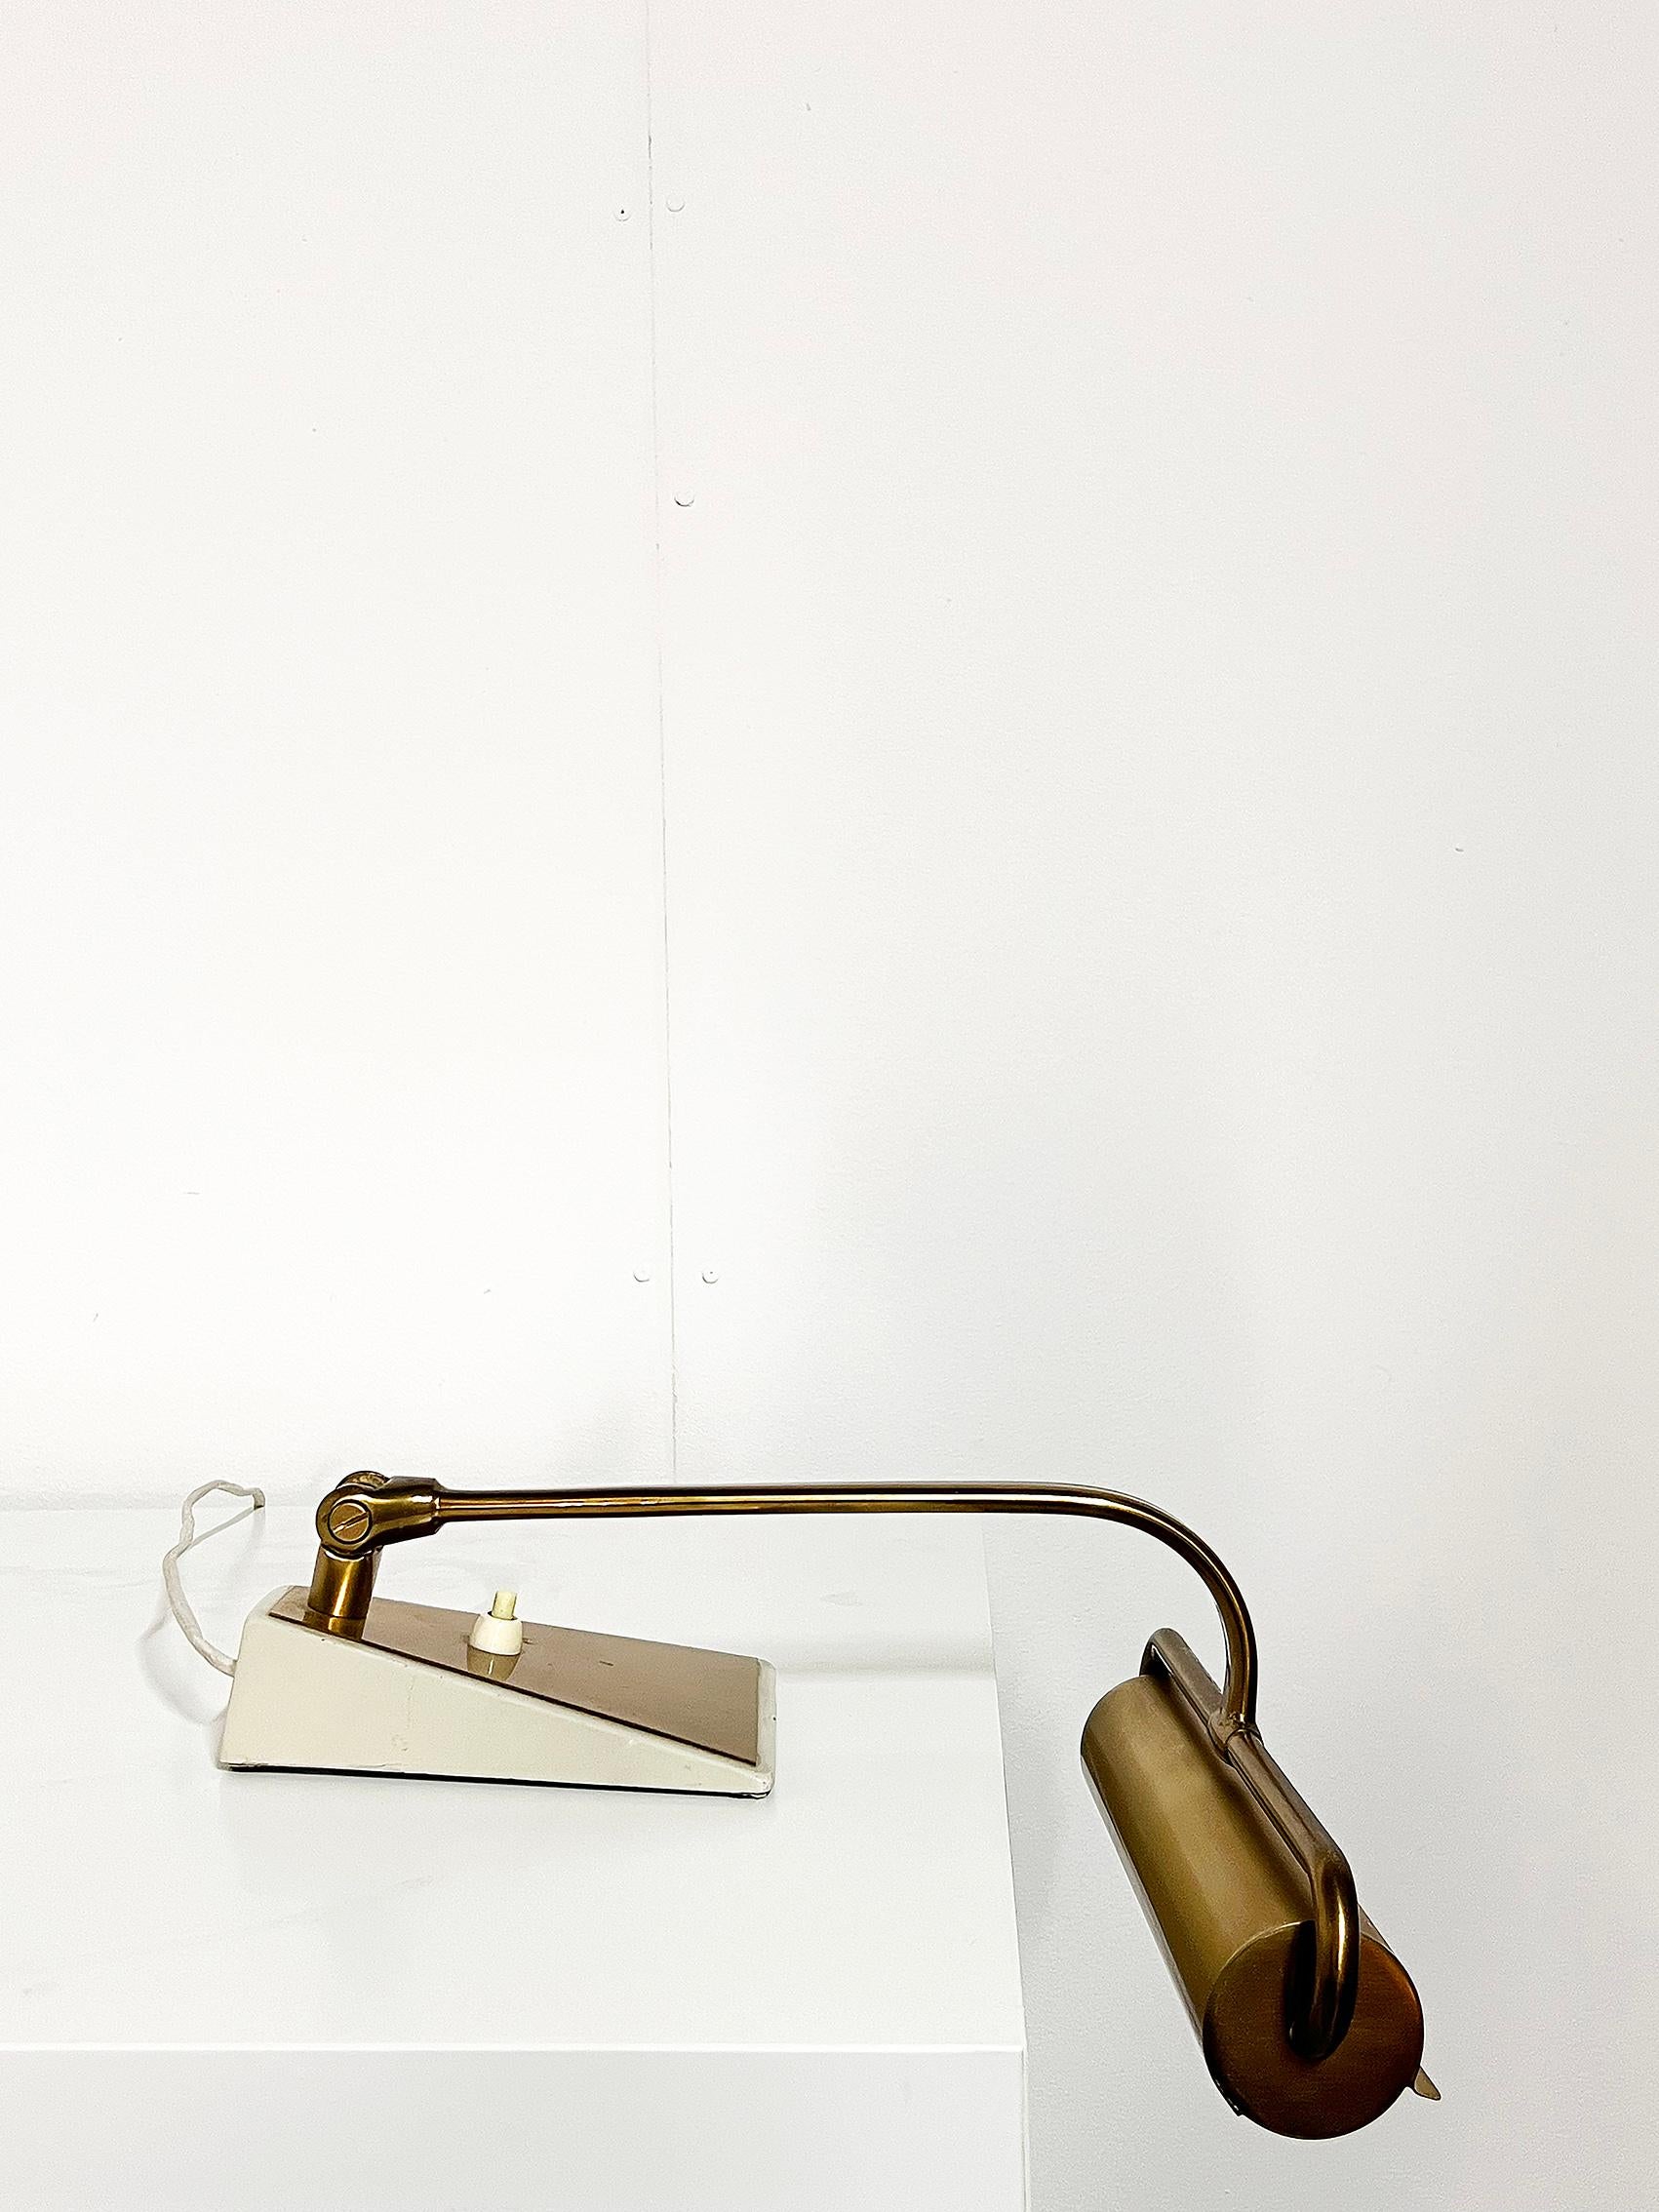 Mid-20th Century Scandinavian Modern Table Lamp in Brass by Boréns ca 1950-1960's For Sale